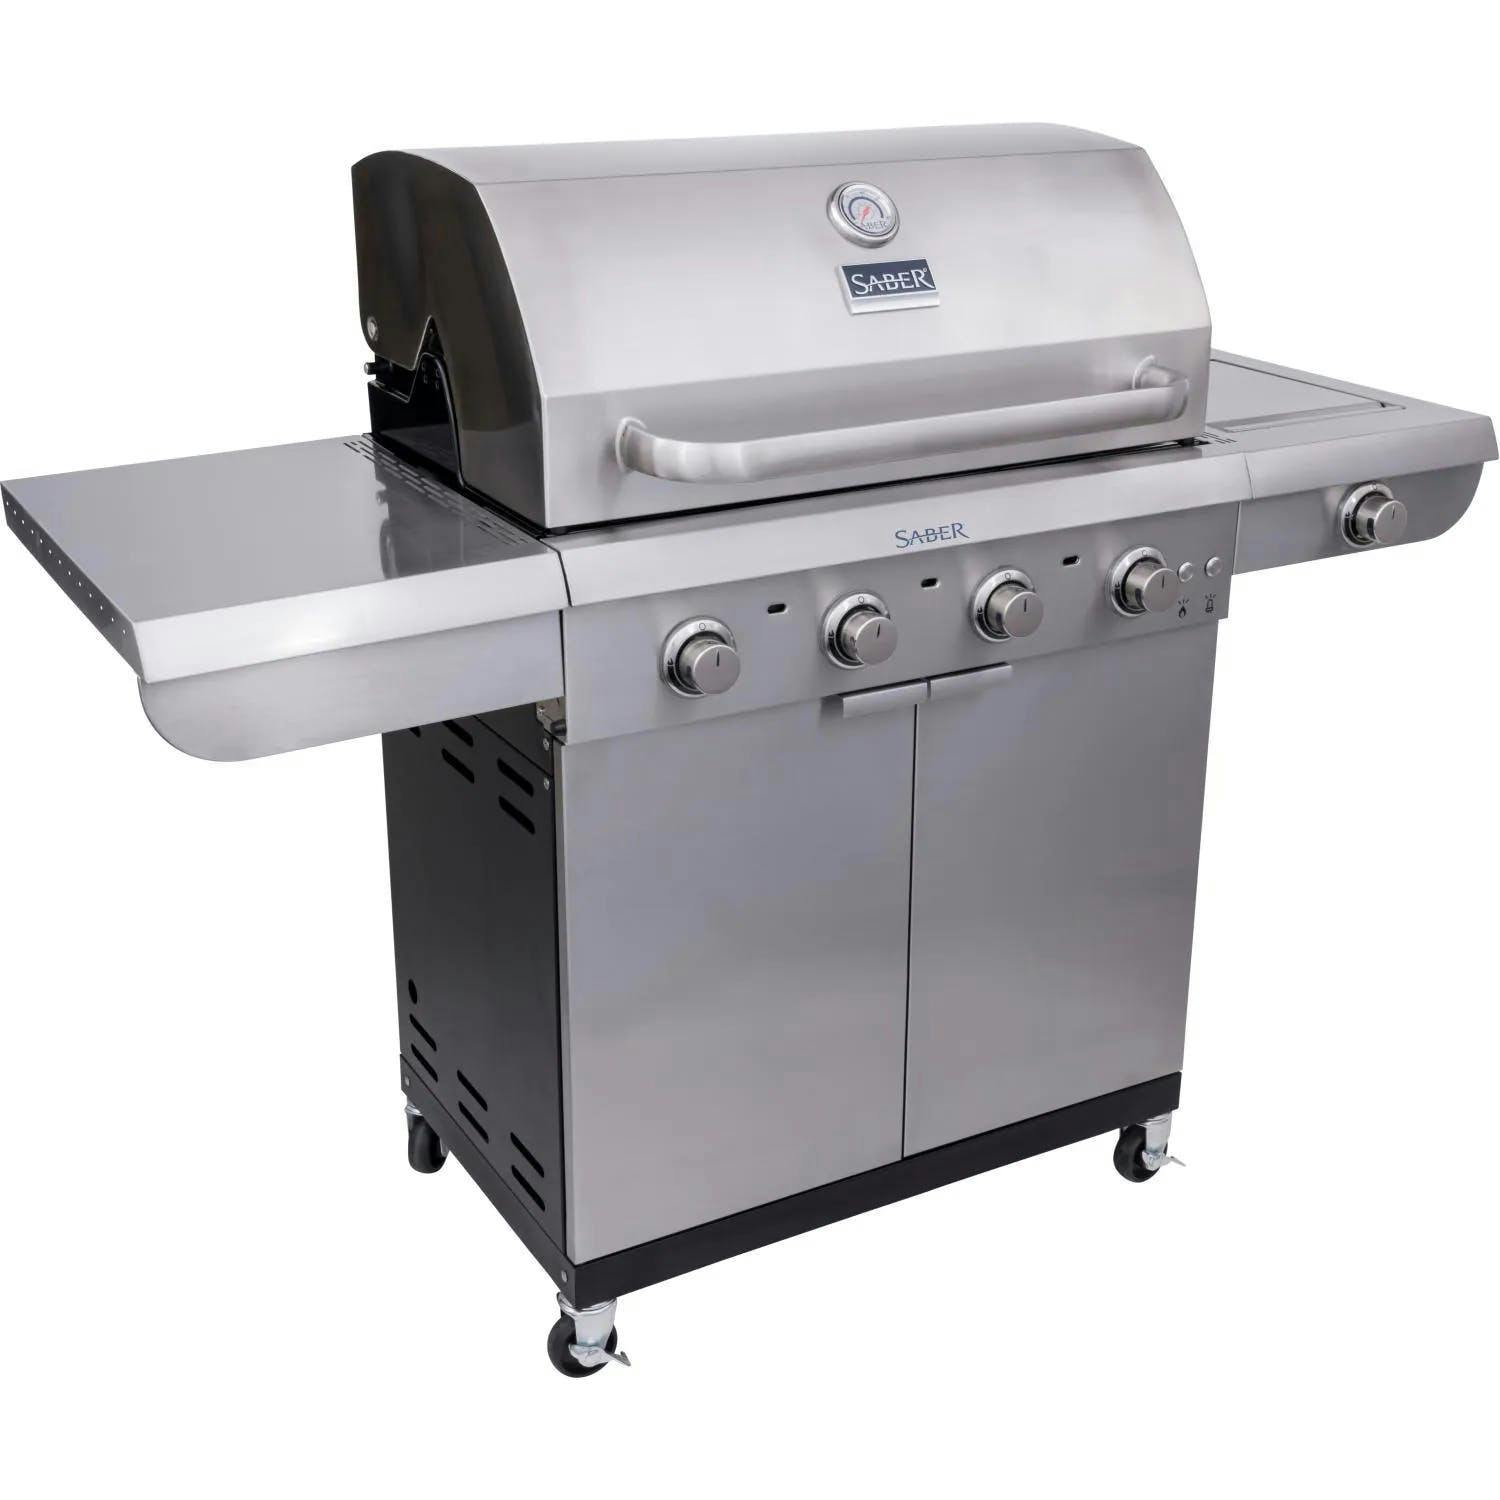 Saber Select Infrared Gas Grill